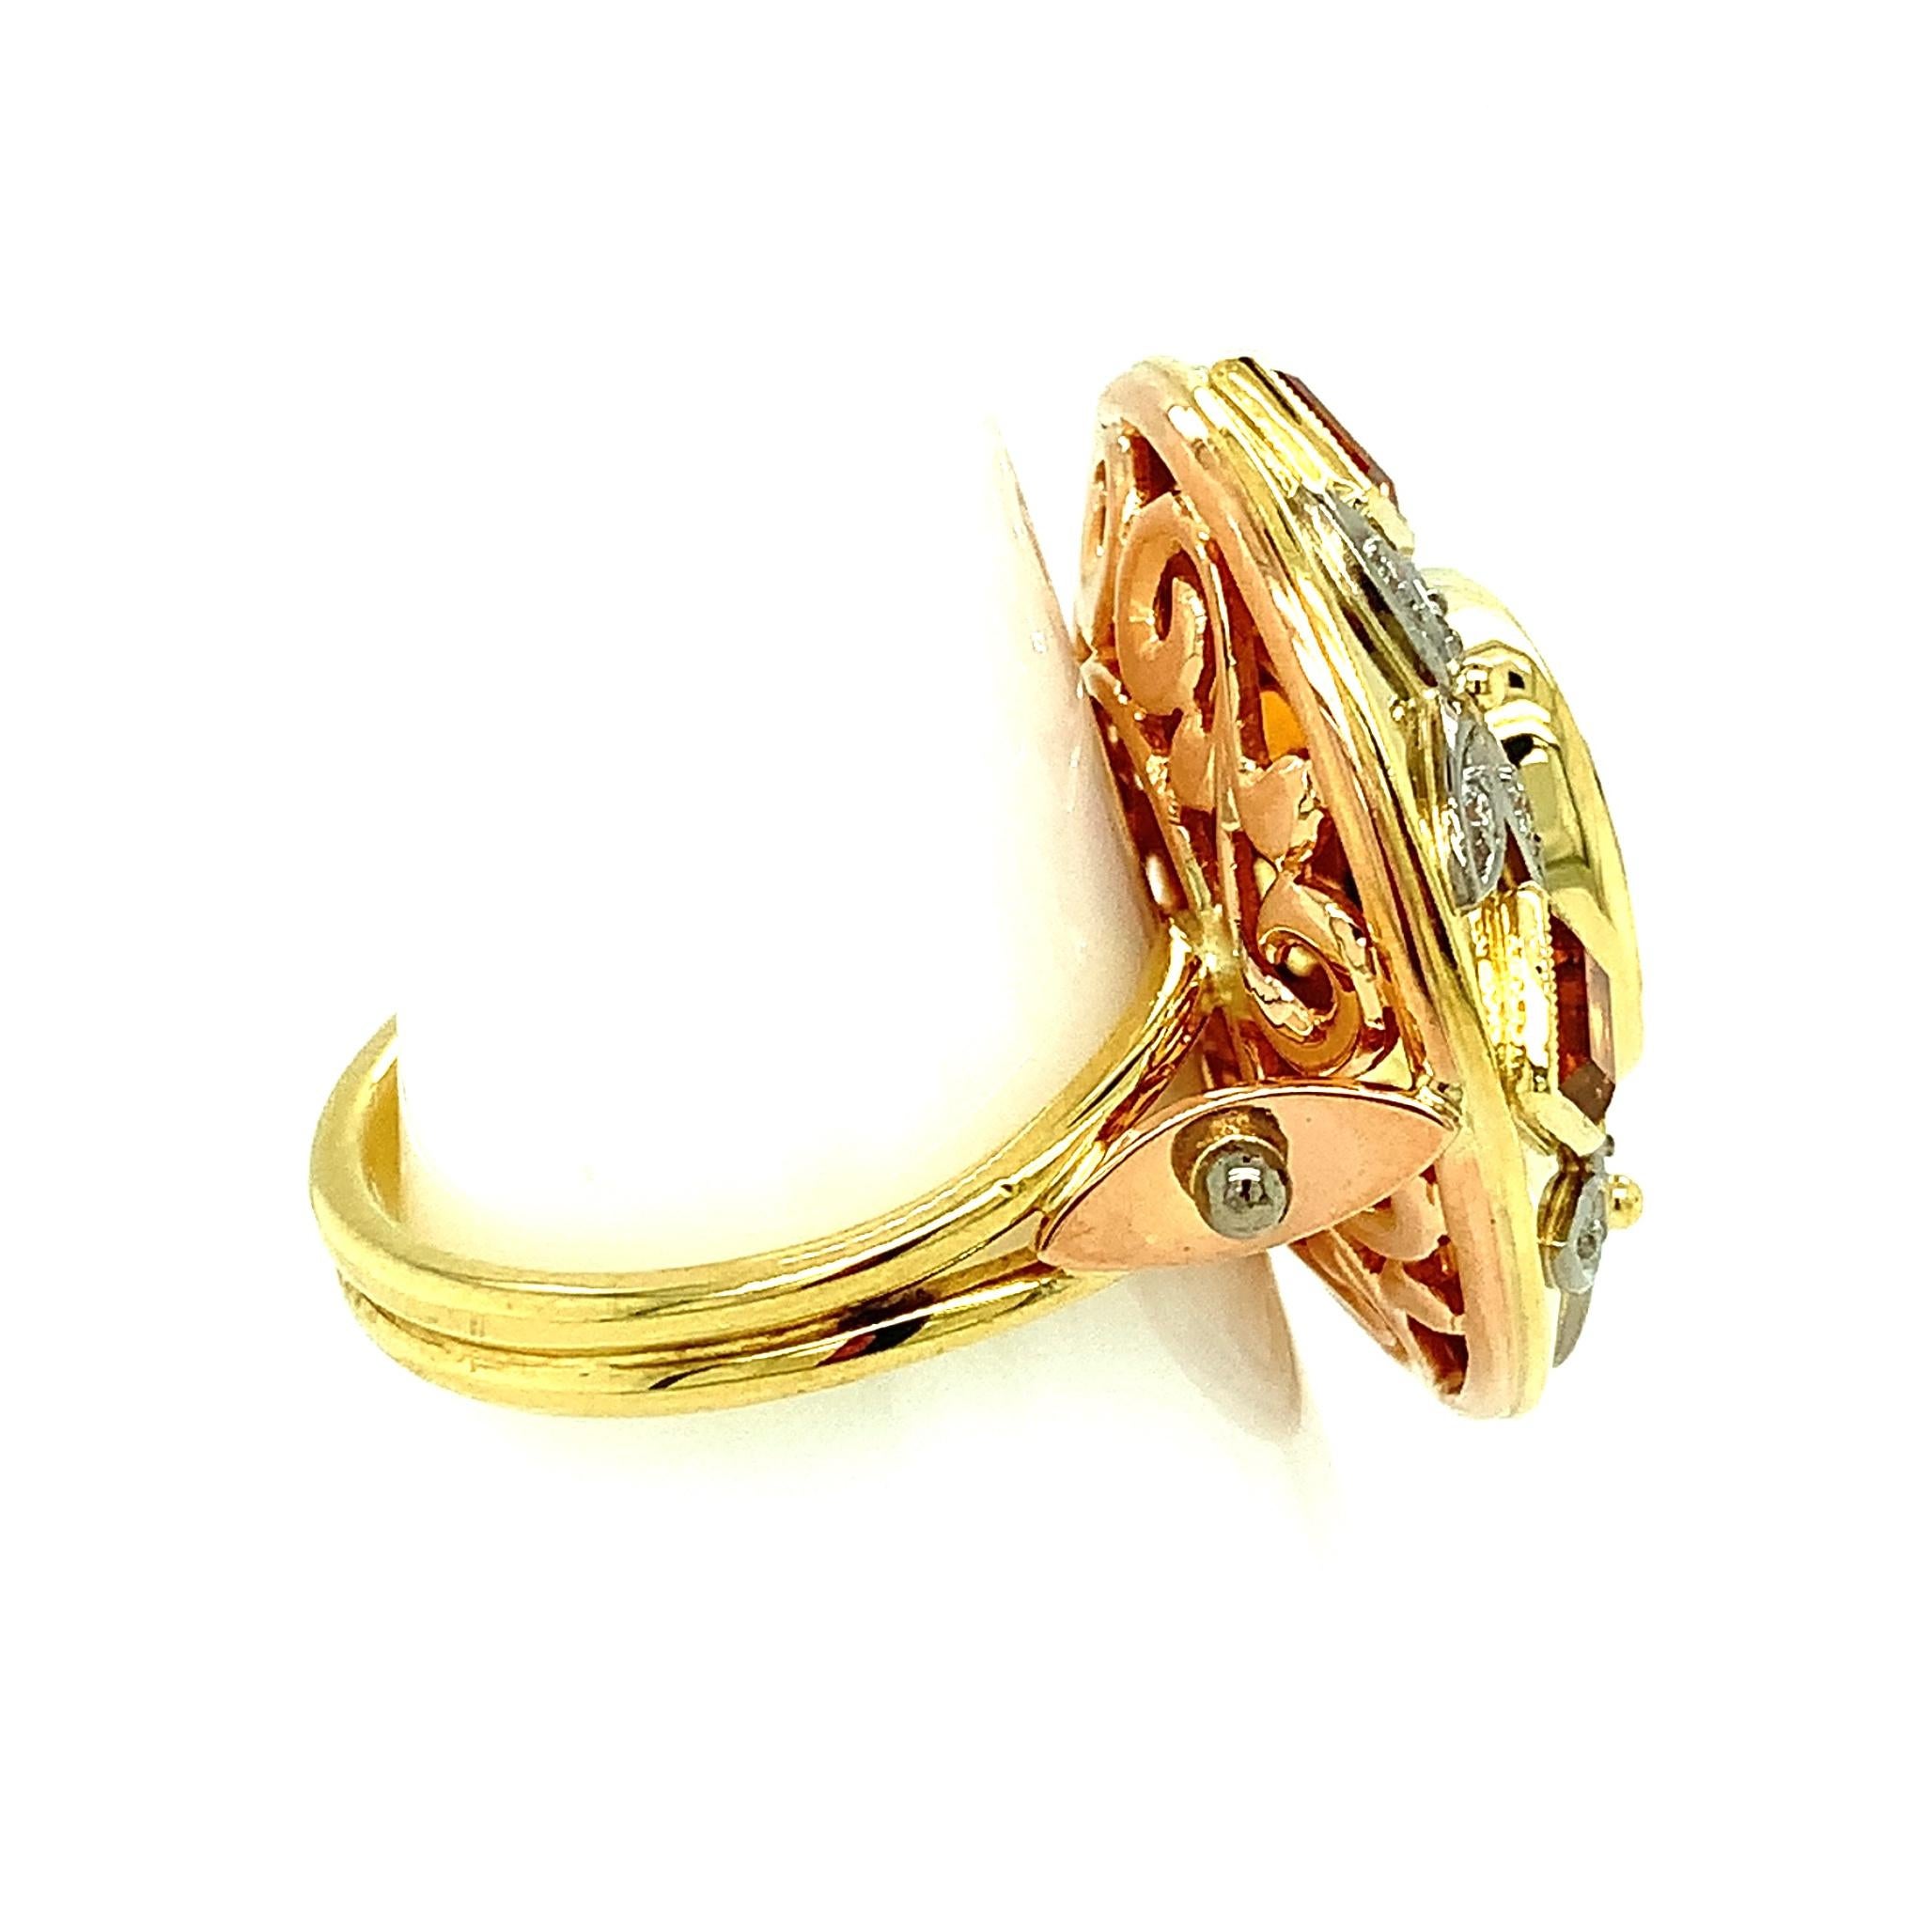 Women's 5.23 Carat Red Spinel, Citrine and Diamond Cocktail Ring in Tri-colored Gold For Sale